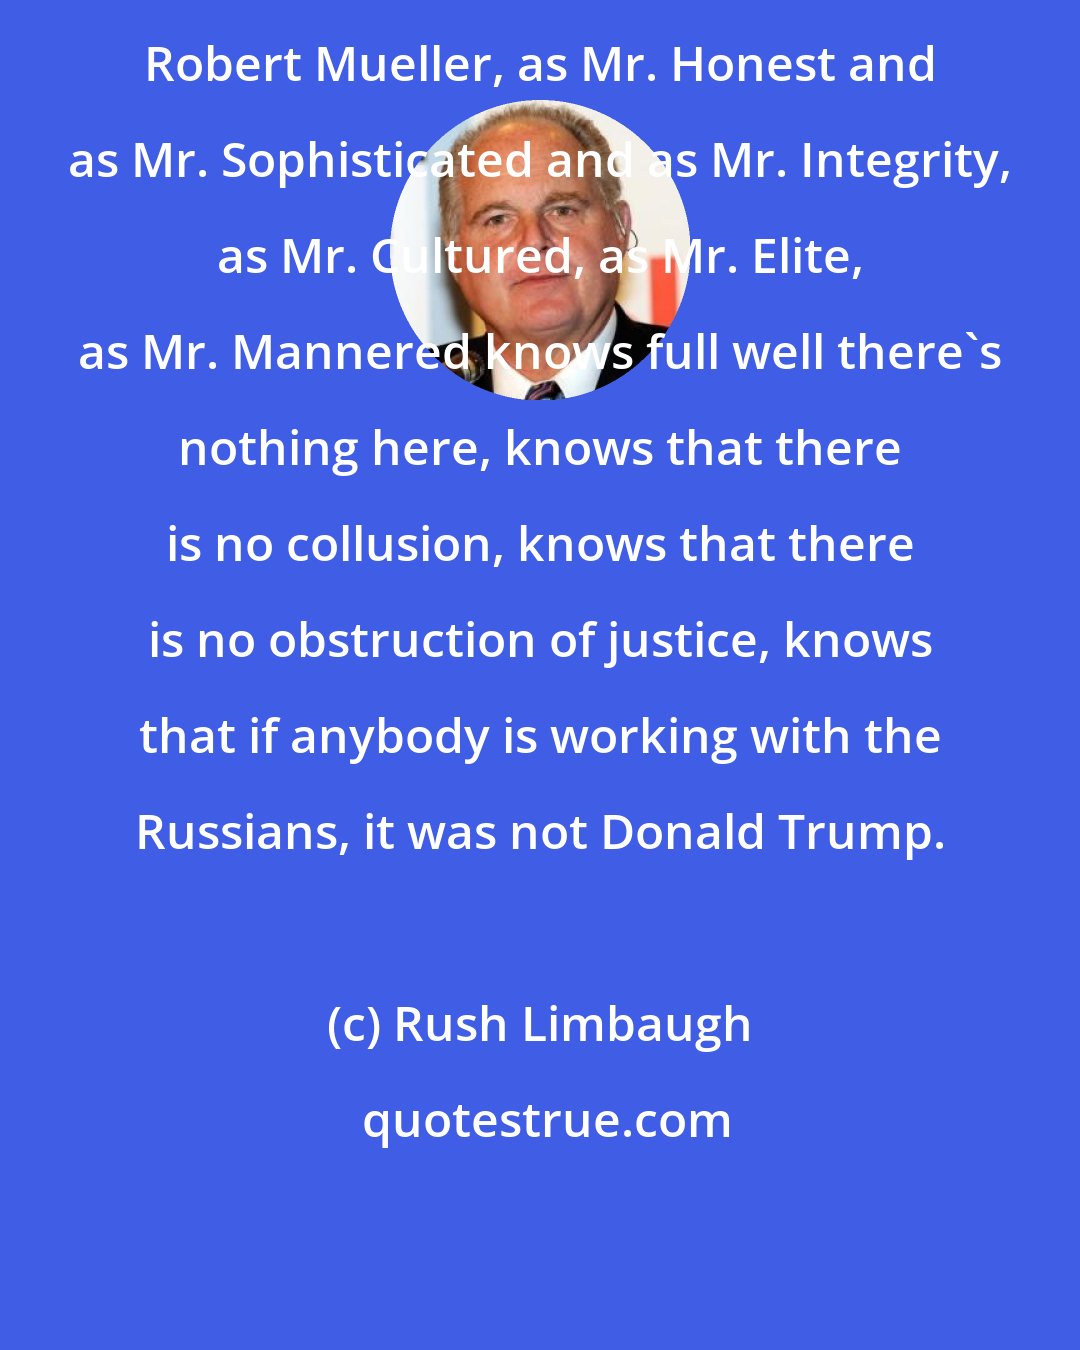 Rush Limbaugh: Robert Mueller, as Mr. Honest and as Mr. Sophisticated and as Mr. Integrity, as Mr. Cultured, as Mr. Elite, as Mr. Mannered knows full well there's nothing here, knows that there is no collusion, knows that there is no obstruction of justice, knows that if anybody is working with the Russians, it was not Donald Trump.